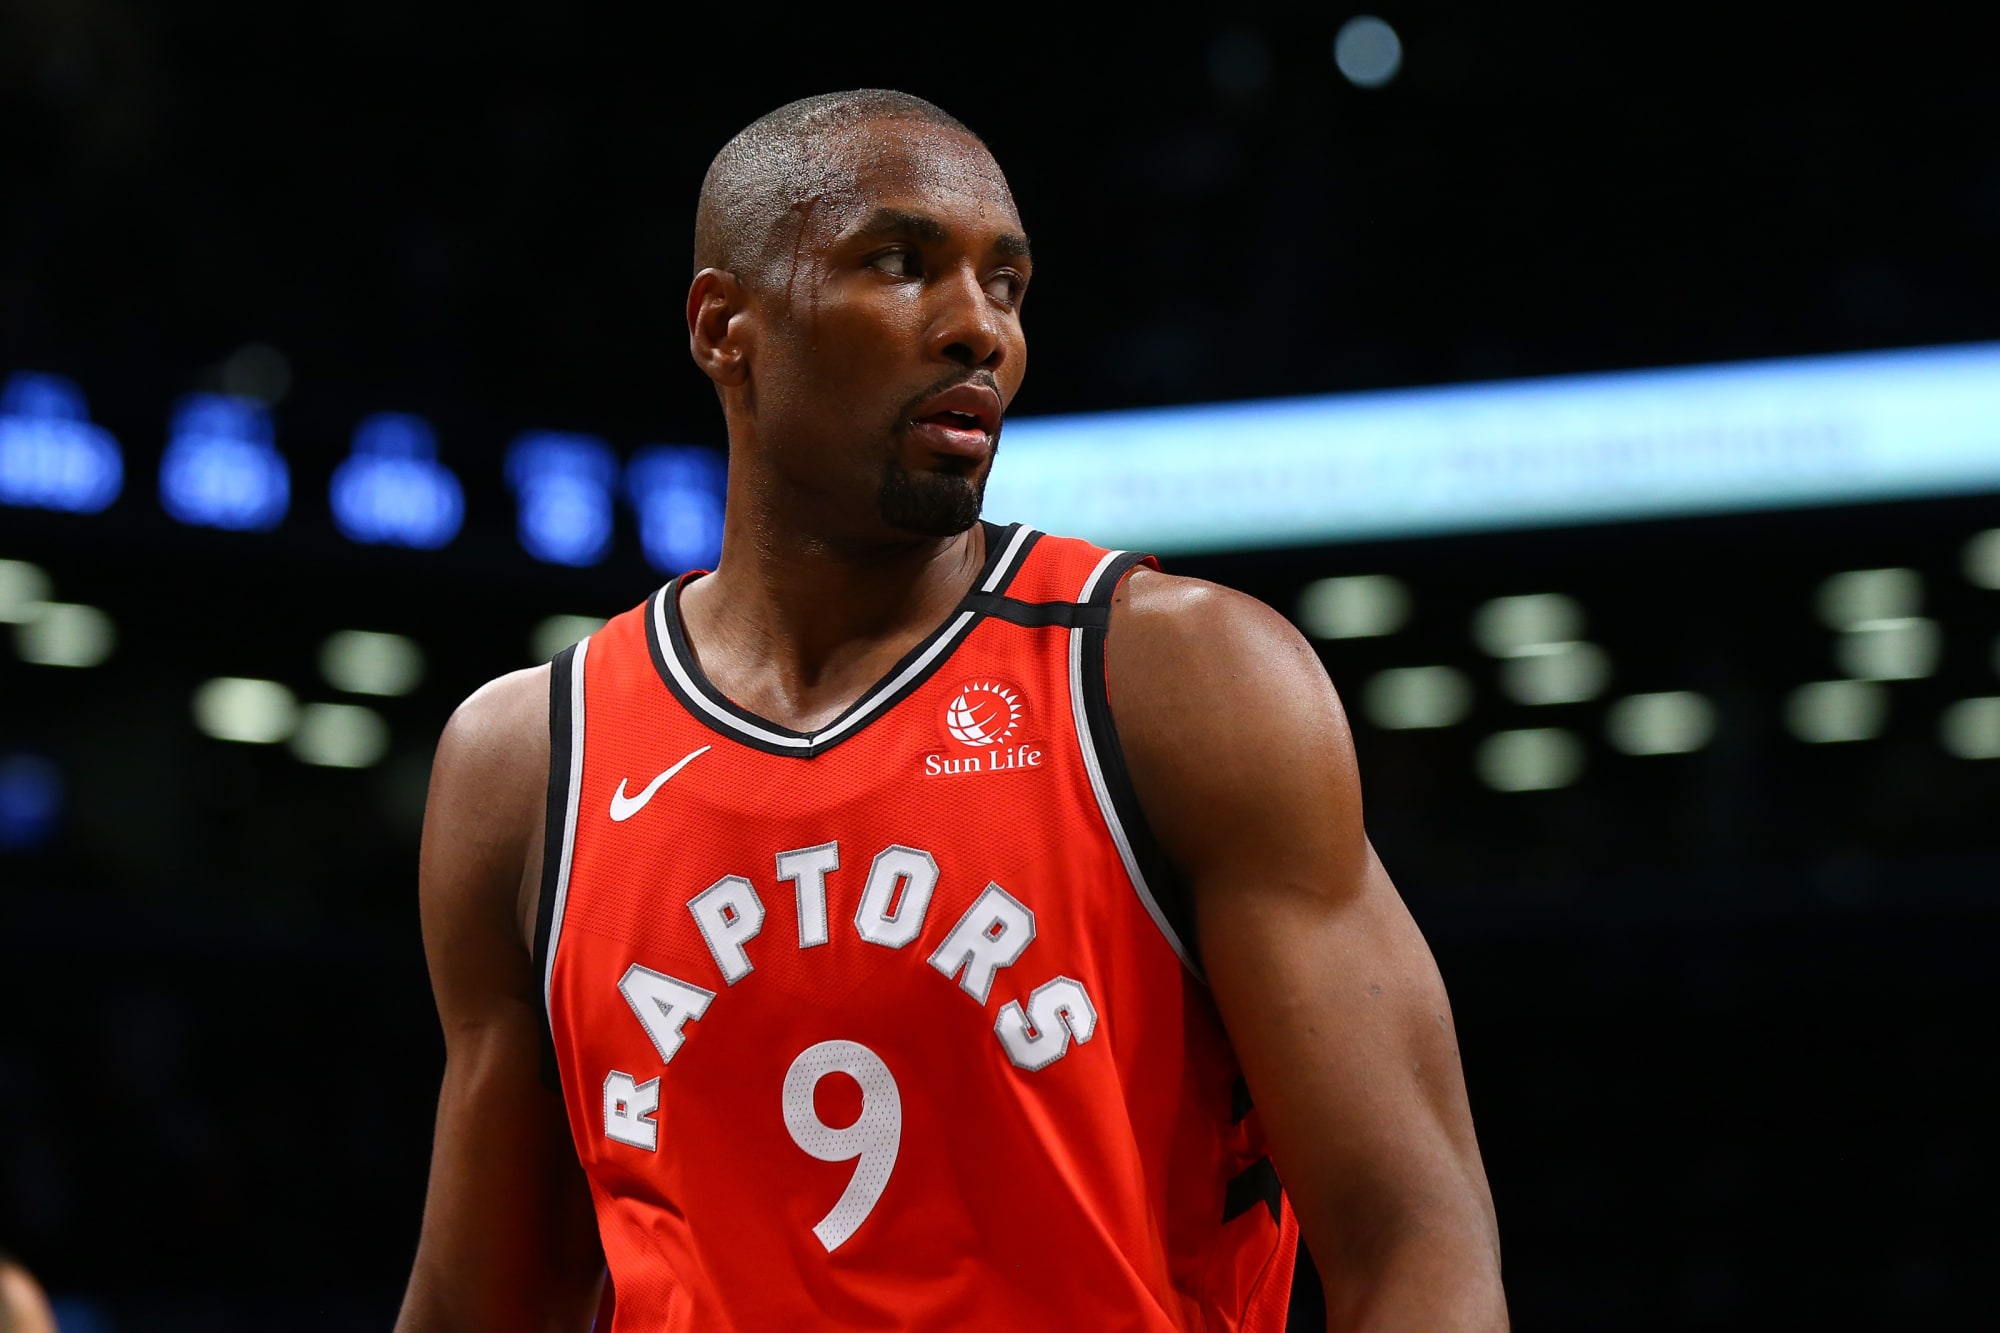 Serge Ibaka wants to re-sign with the Toronto Raptors